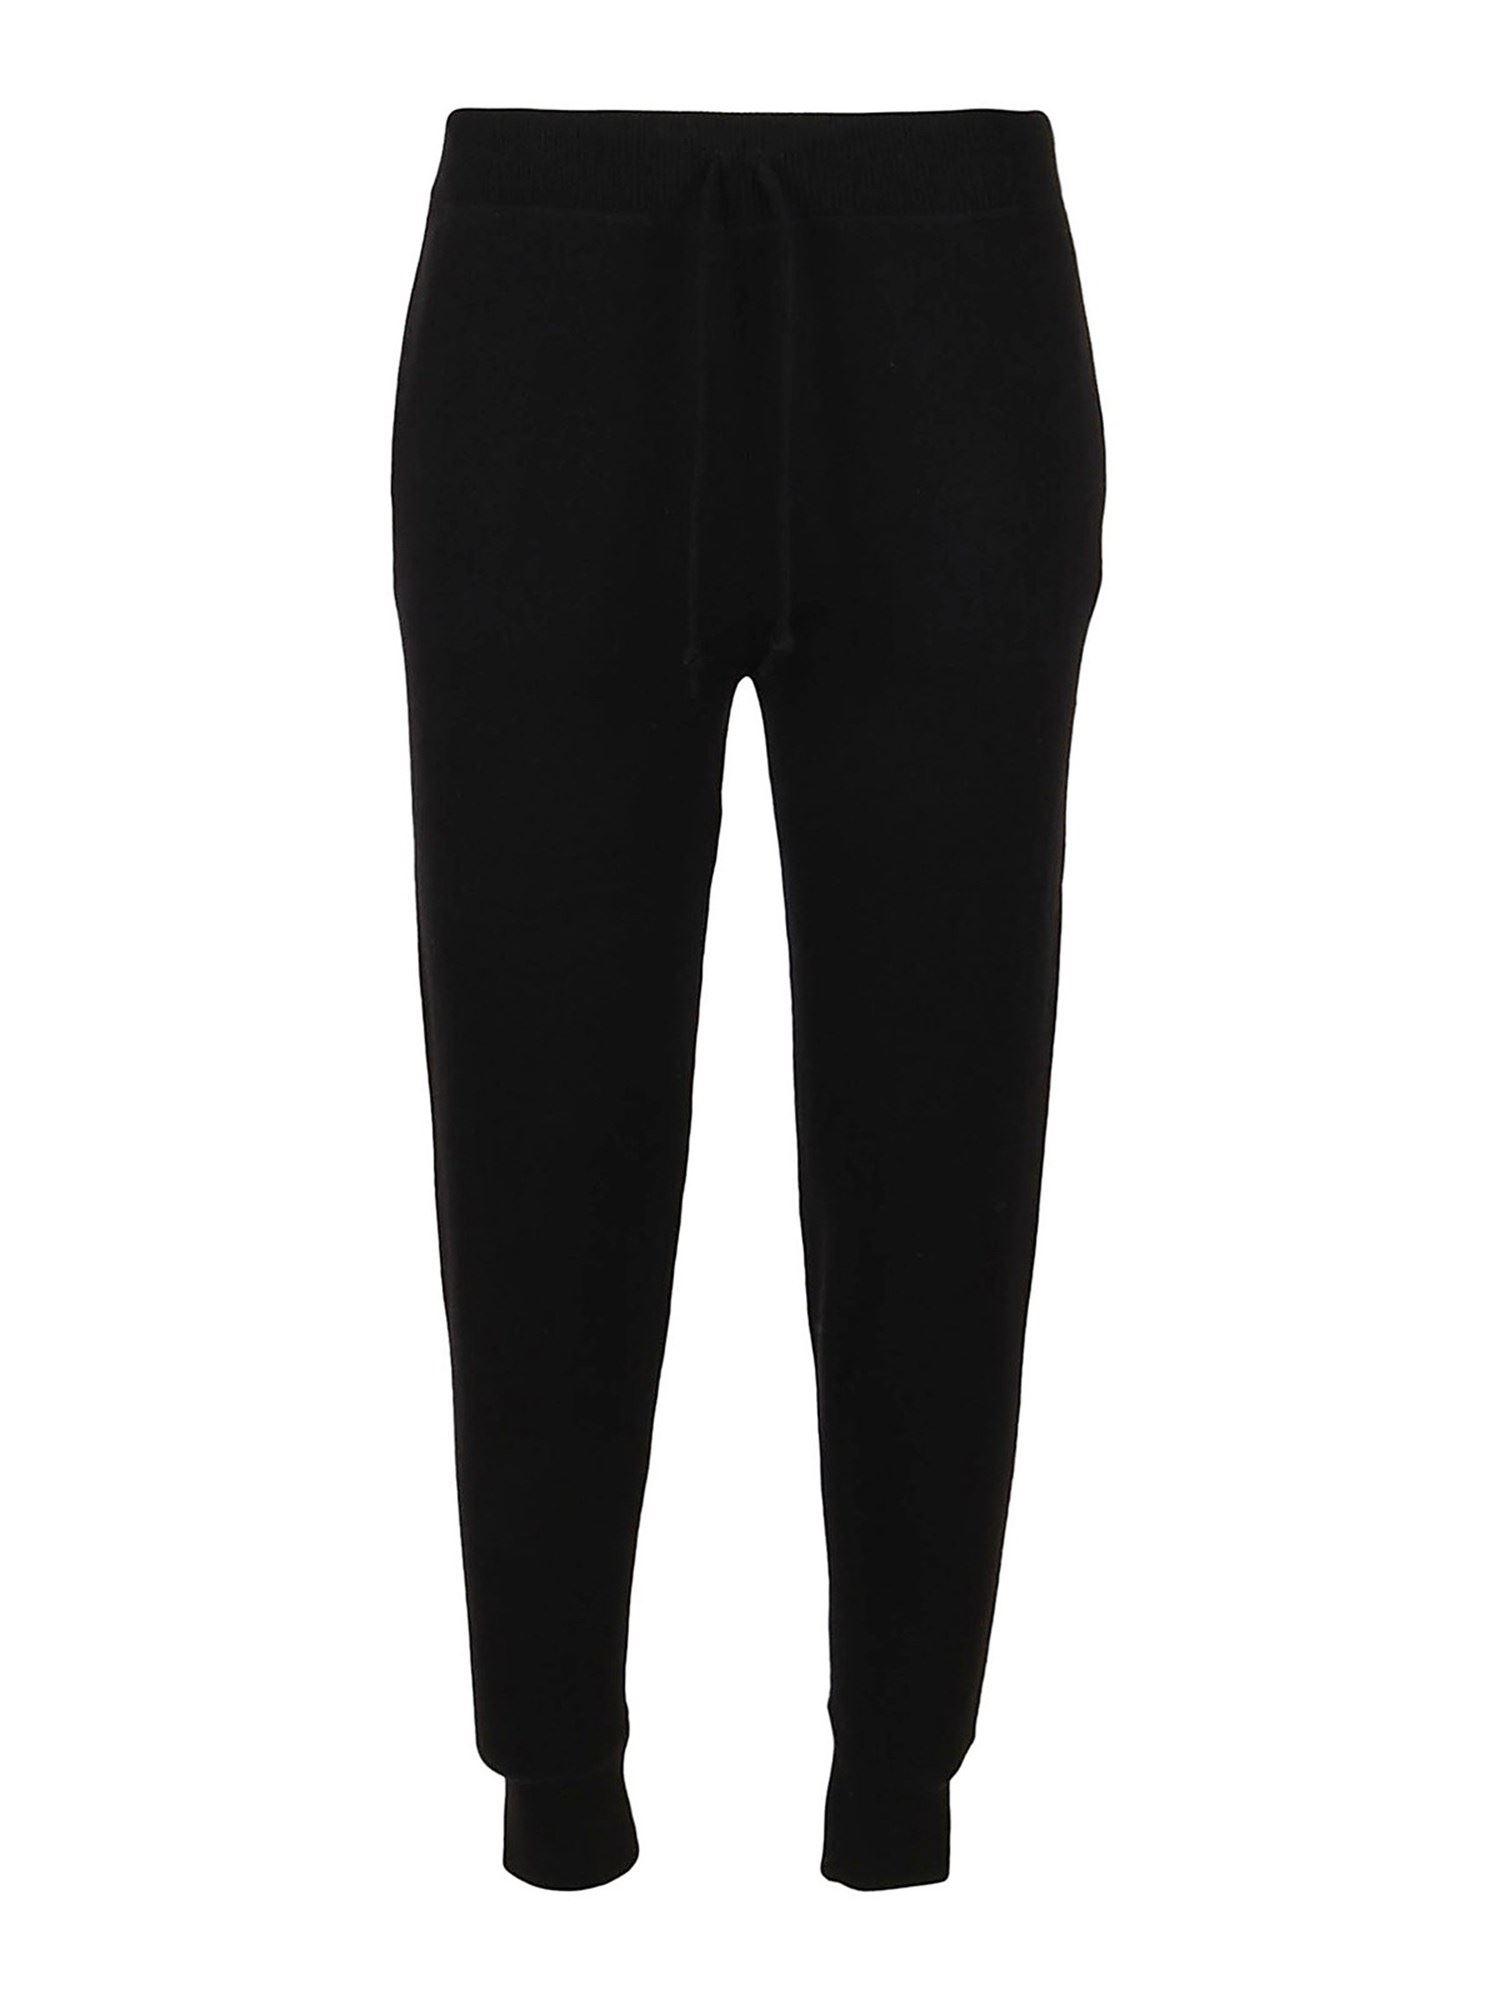 Polo Ralph Lauren Cashmere Joggers in Black - Lyst